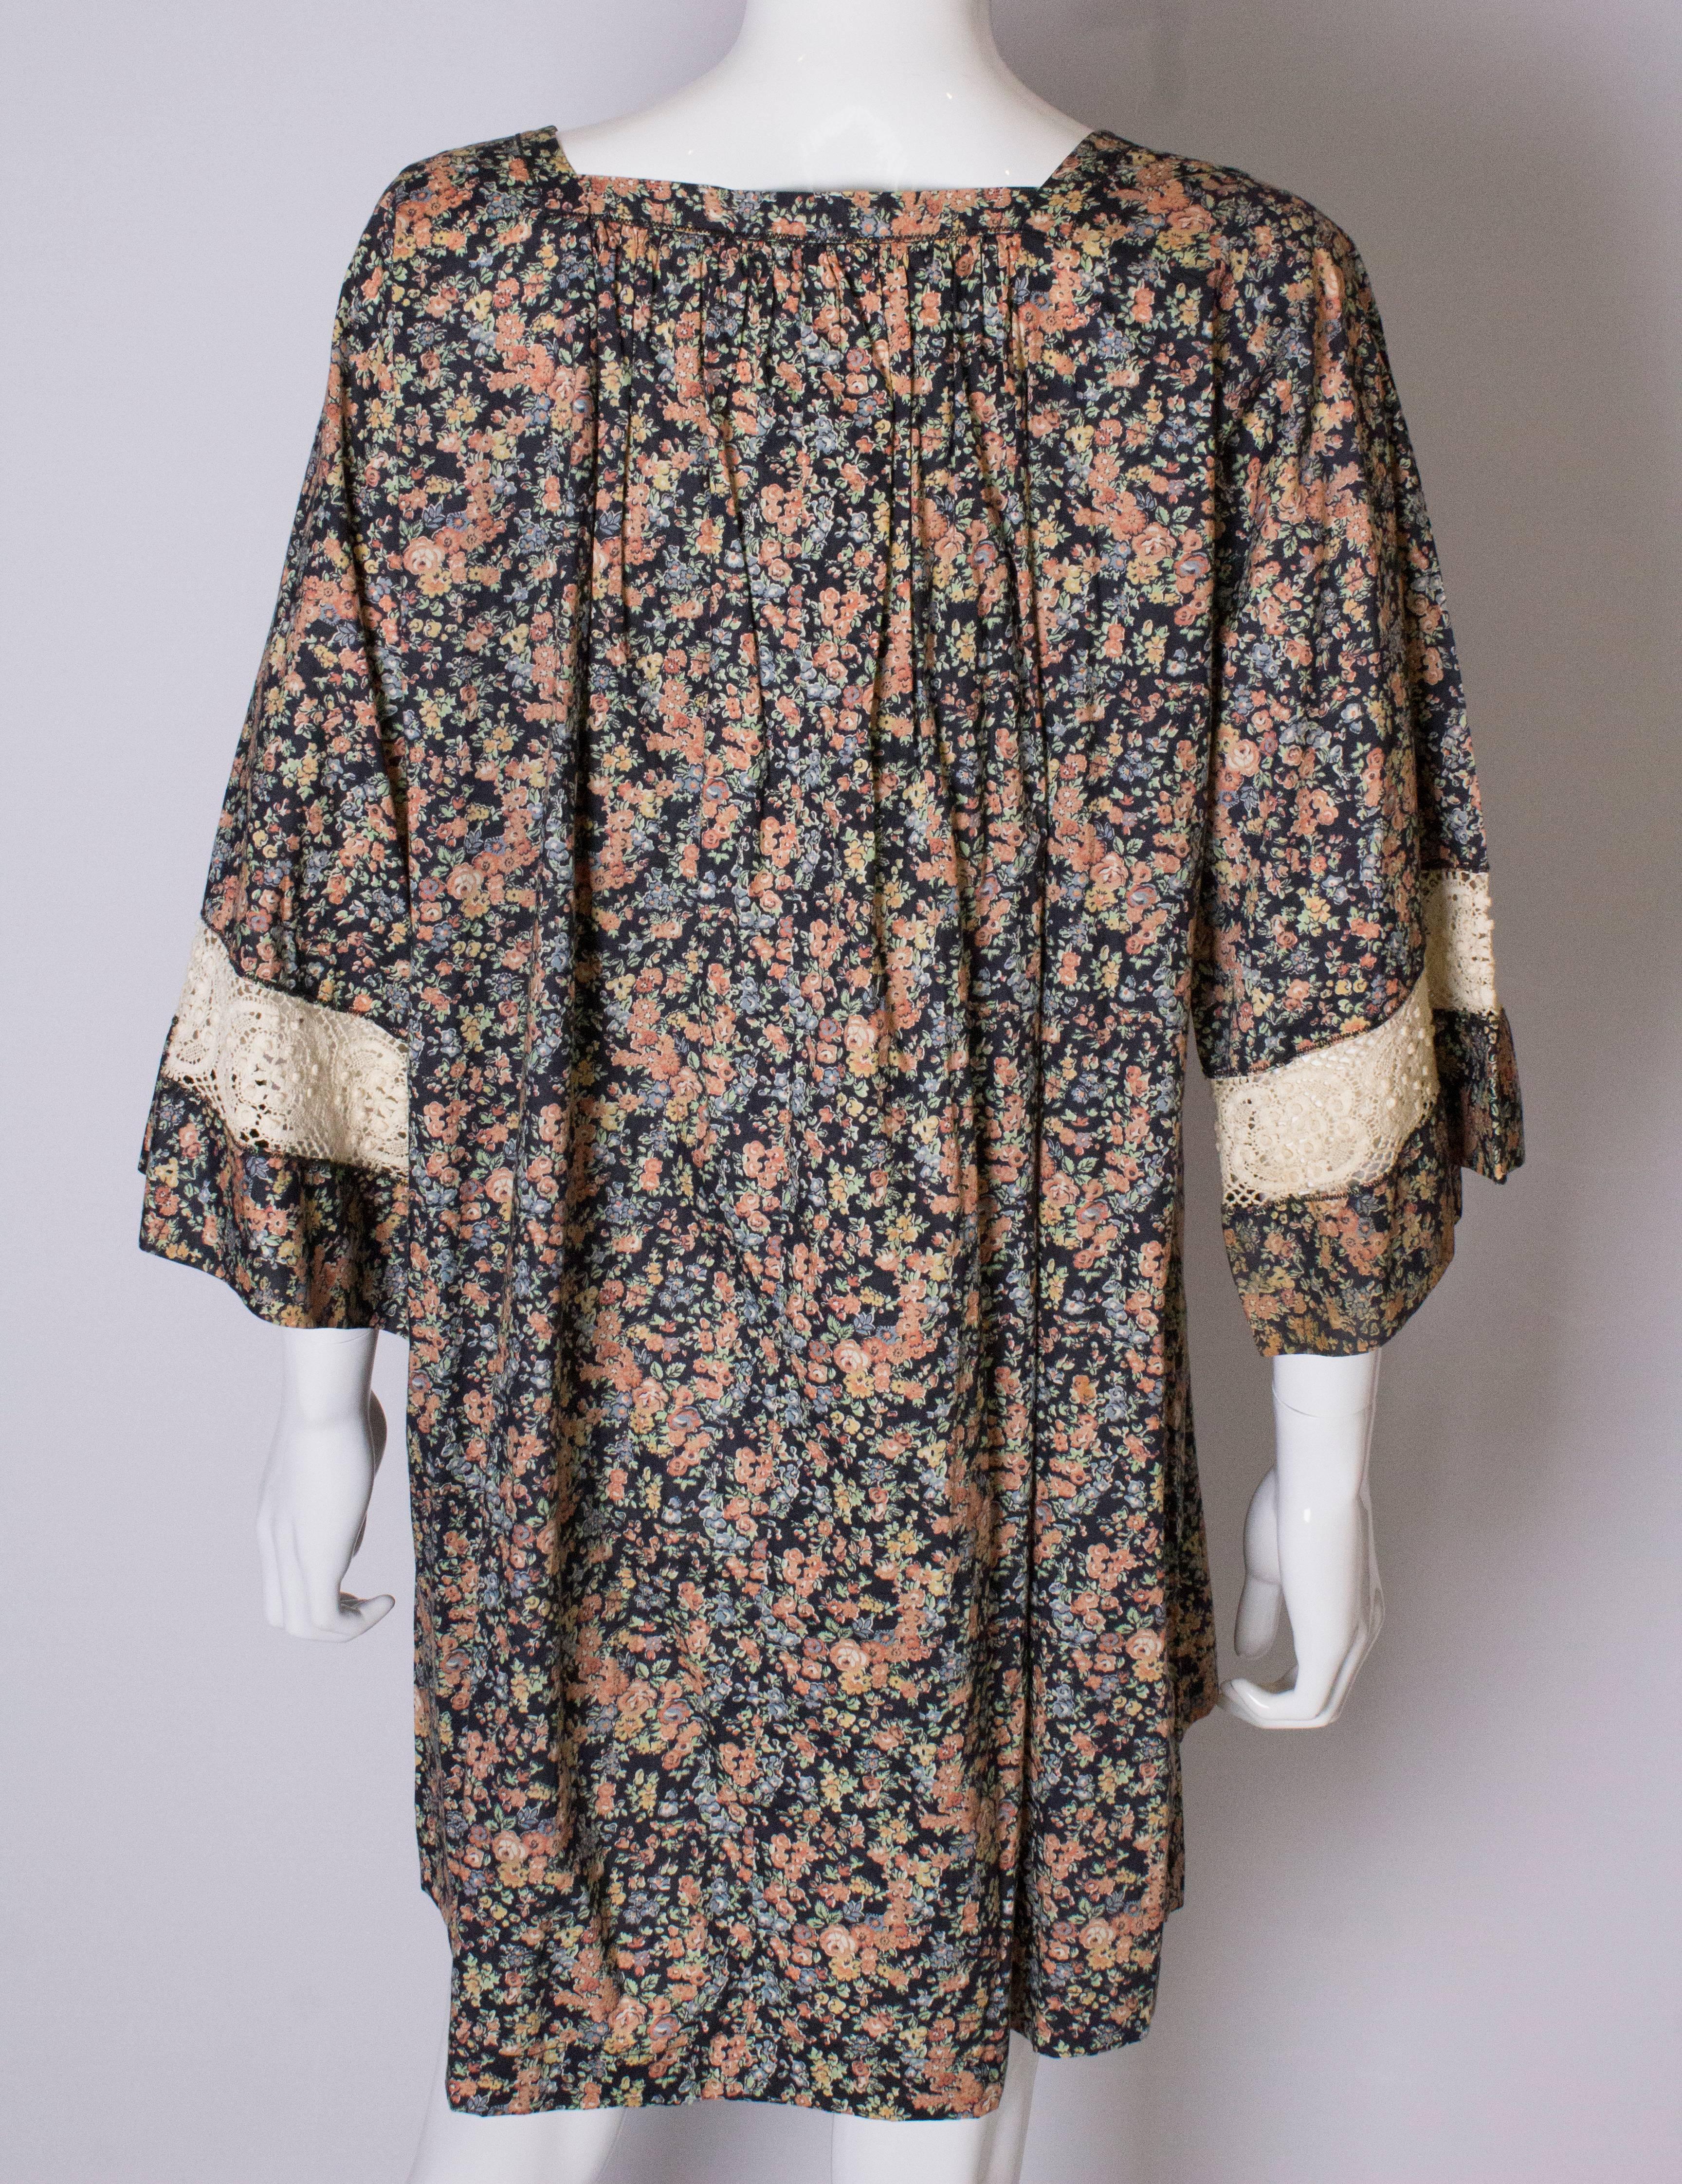 A Vintage 1970s floral print cotton smock  top by Sara Ferni for Liberty 1